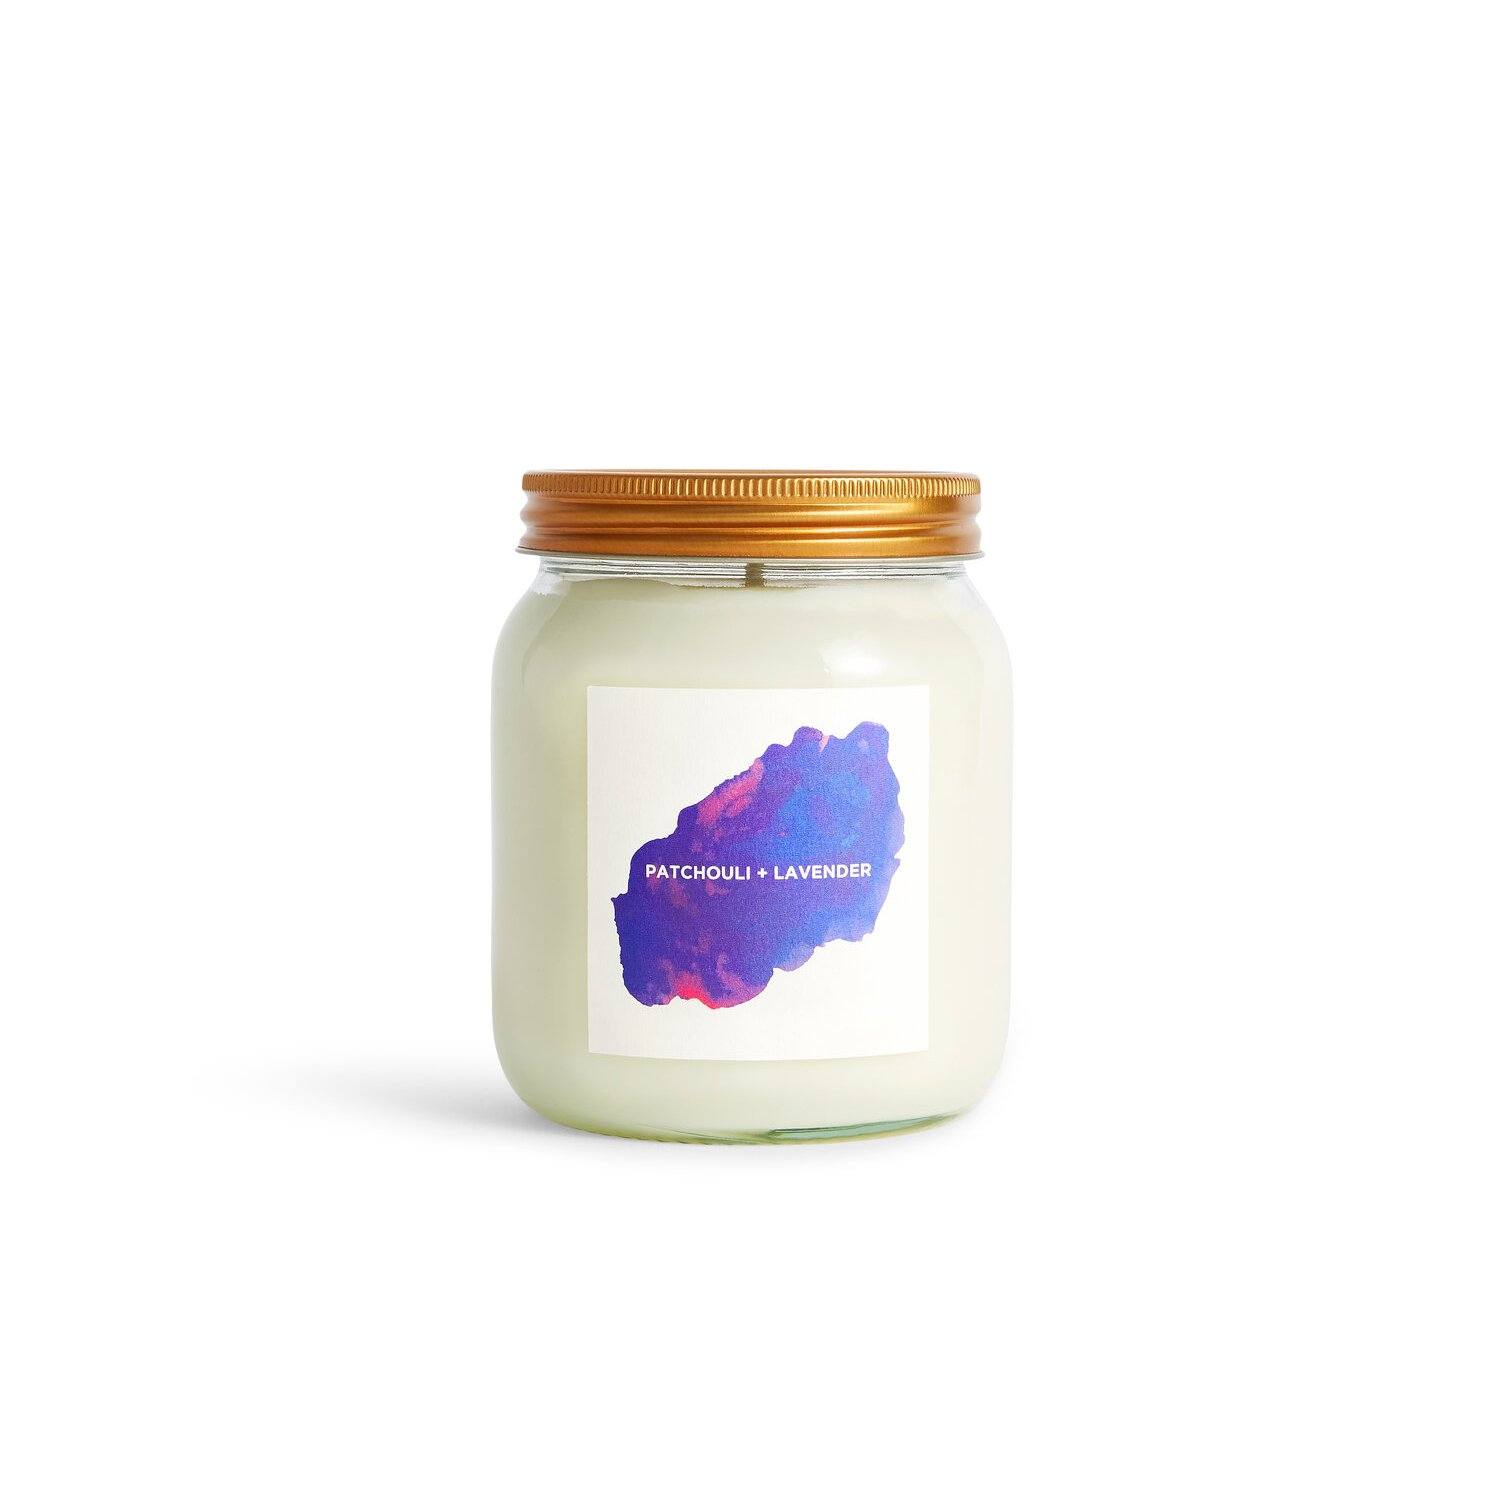 Patchouli + Lavender Aromatherapy Candle Kerzen Self Care Co. 300ml - Genuine Selection